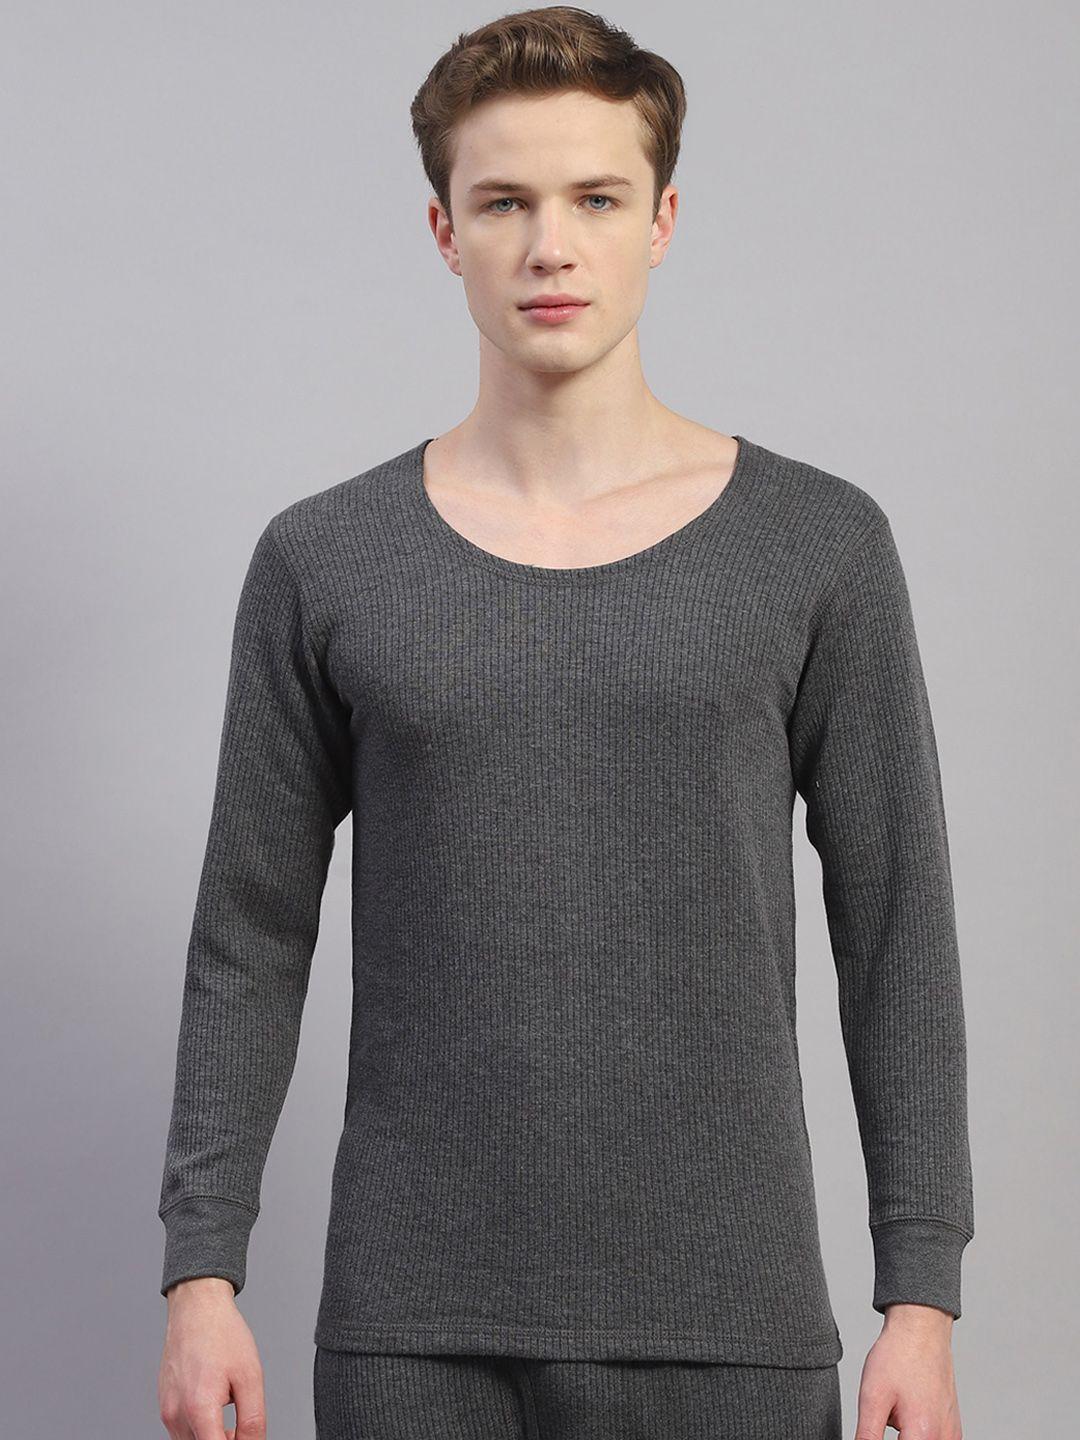 monte-carlo-cotton-thermal-tops